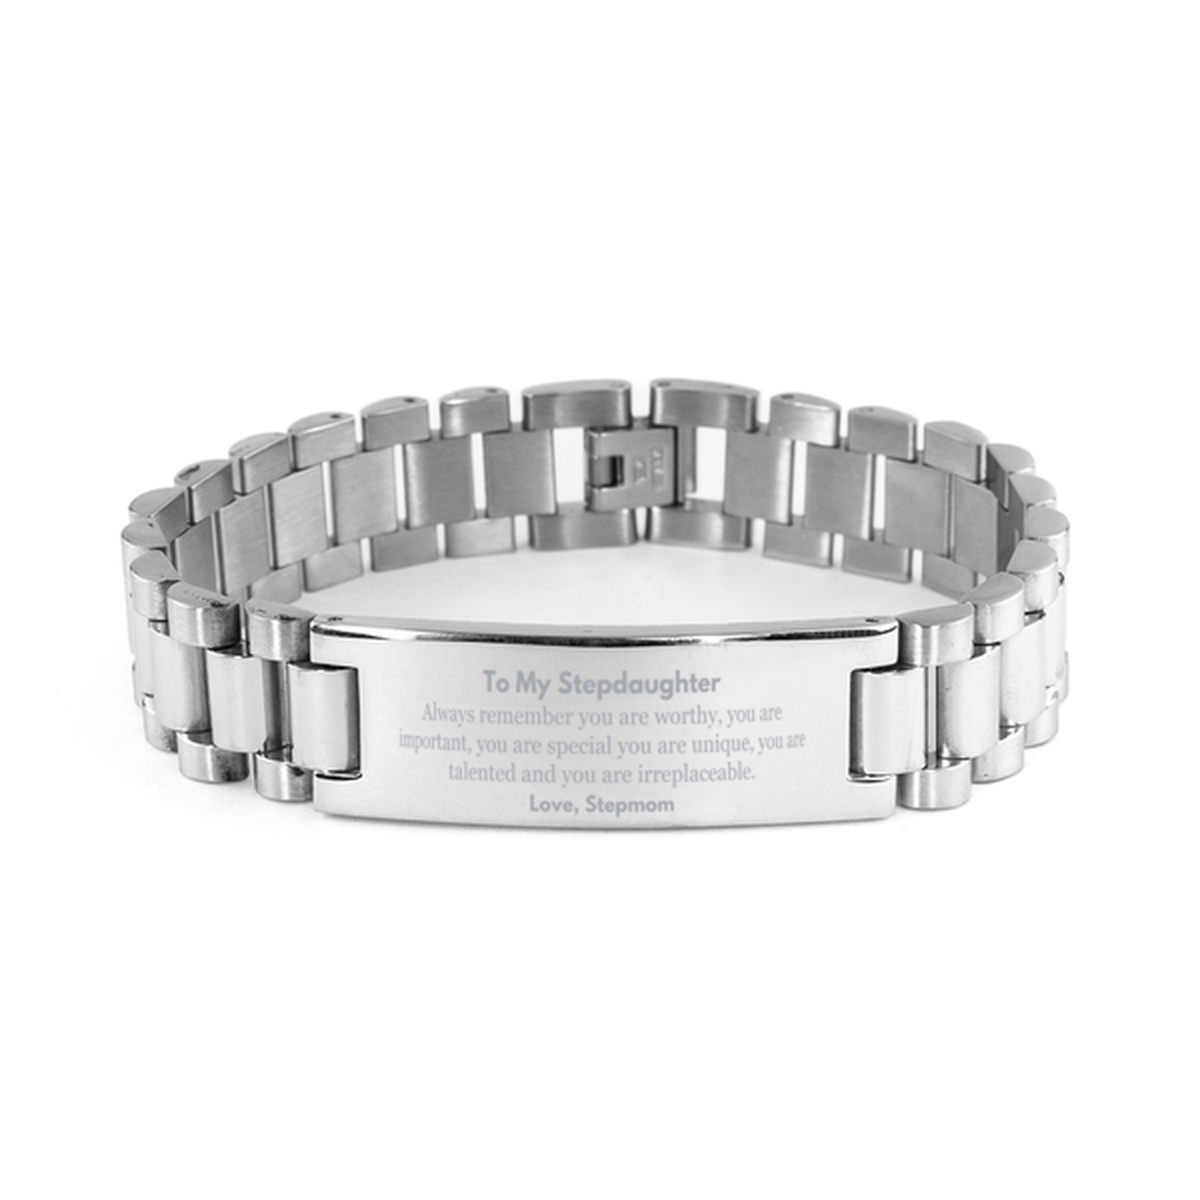 Stepdaughter Birthday Gifts from Stepmom, Inspirational Ladder Stainless Steel Bracelet for Stepdaughter Christmas Graduation Gifts for Stepdaughter Always remember you are worthy, you are important. Love, Stepmom